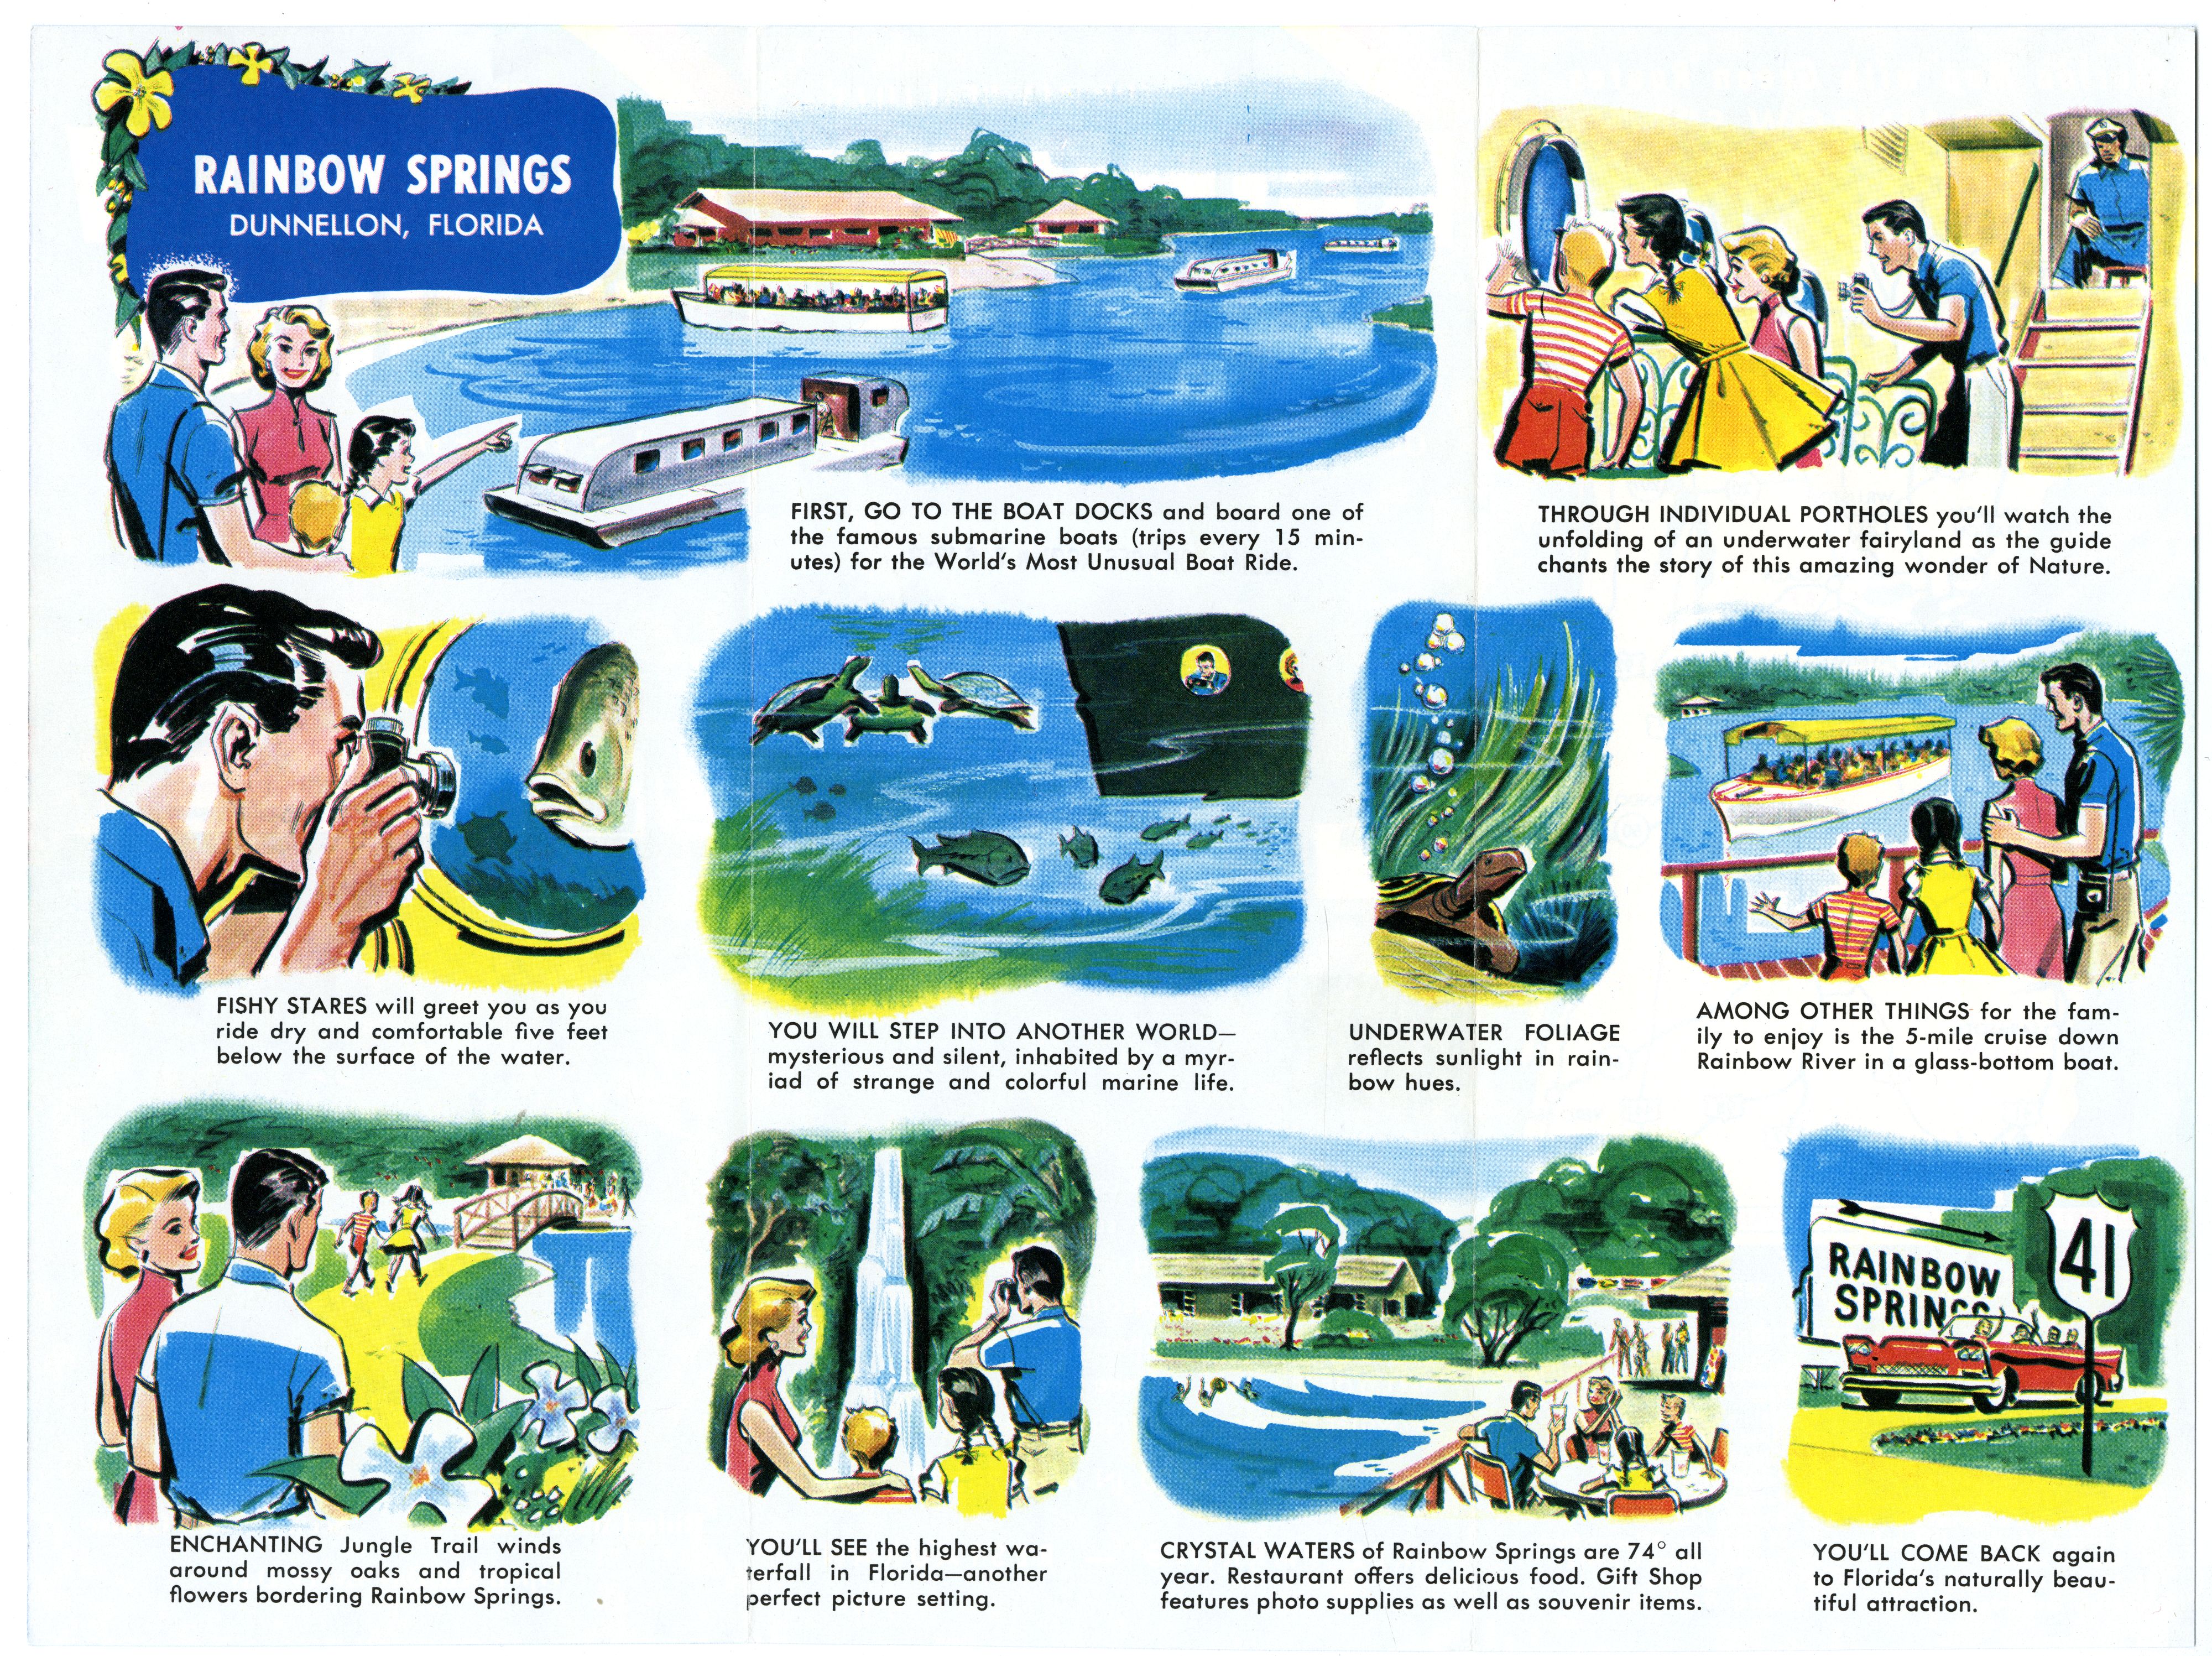 Brochure from around 1959 advertising Rainbow Springs. Click or tap the image to view the entire brochure.